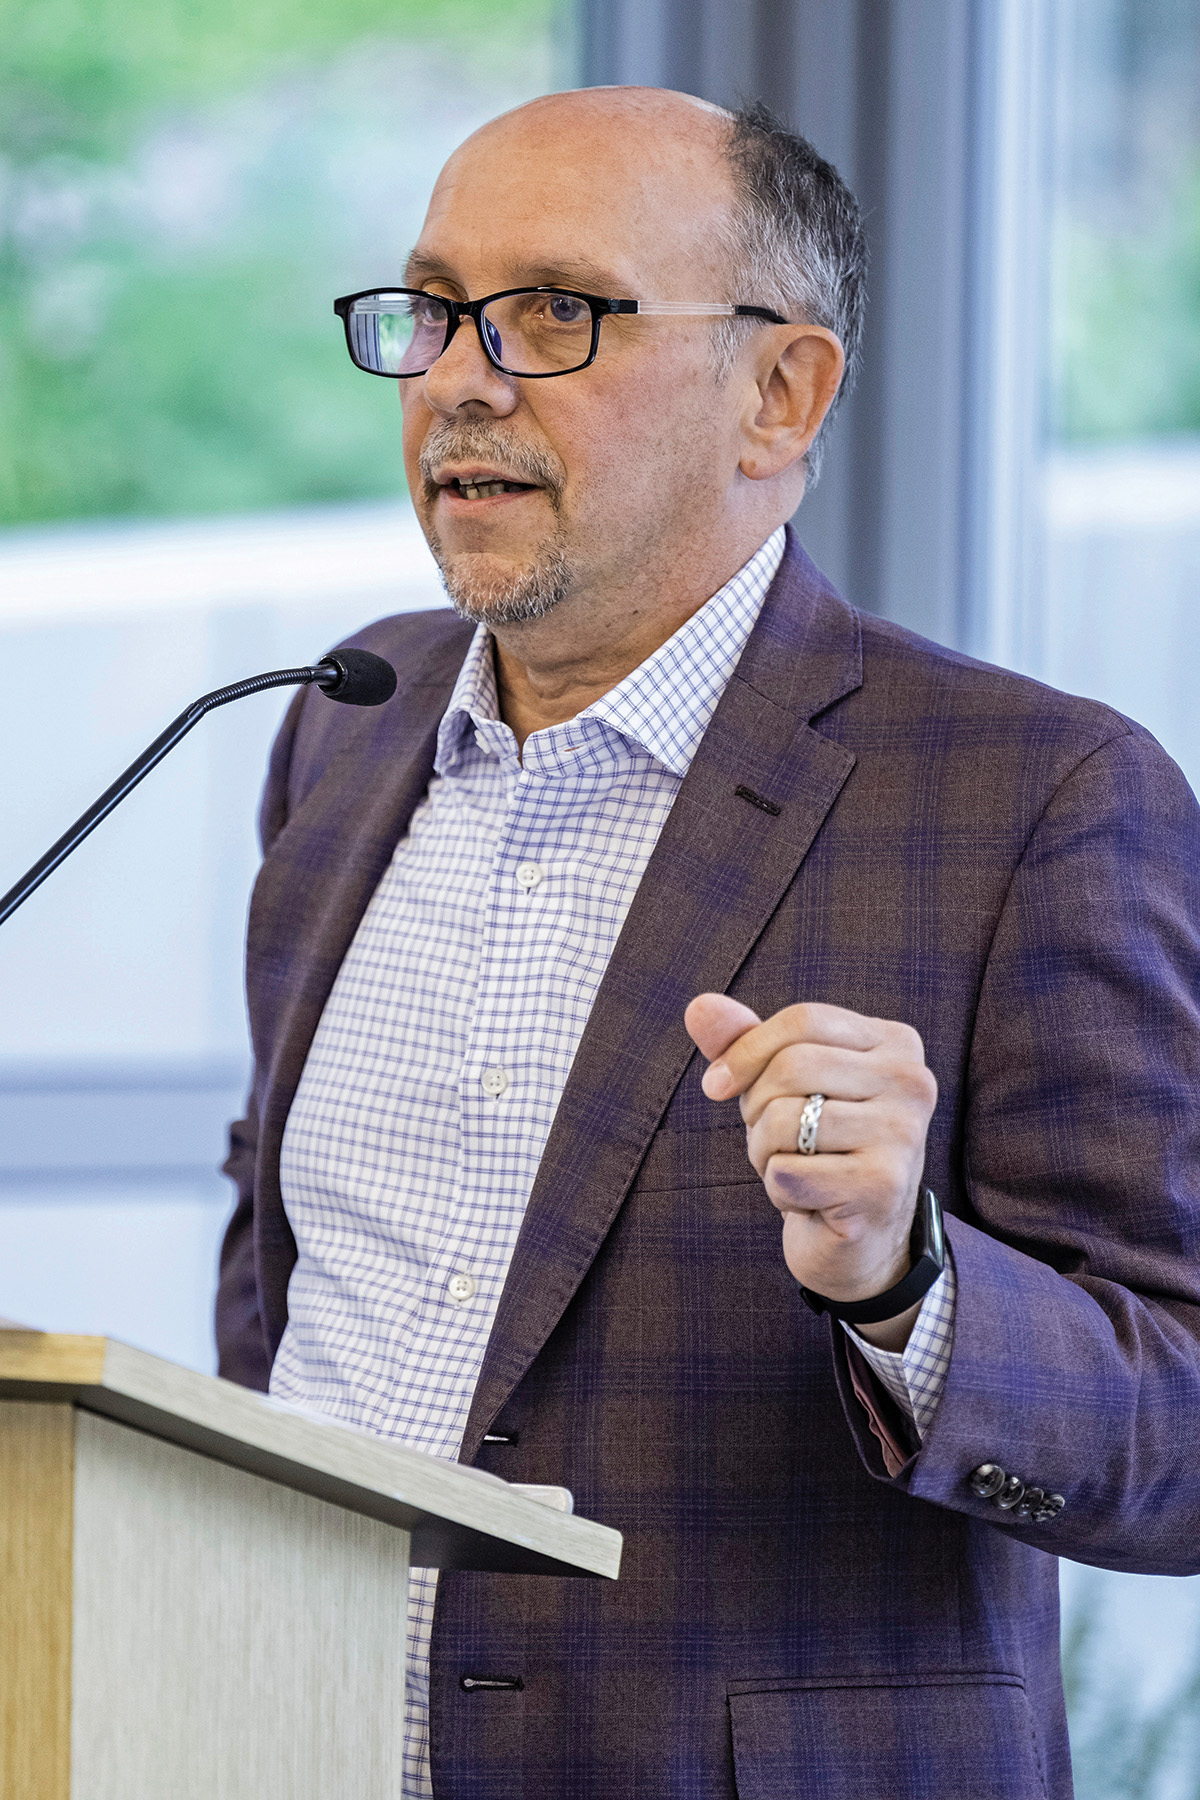 A photo of Jamie Merisotis, a person with pale skin and short graying hair. Merisotis wears a gray suit and glasses, and stands at a lectern with a microphone.